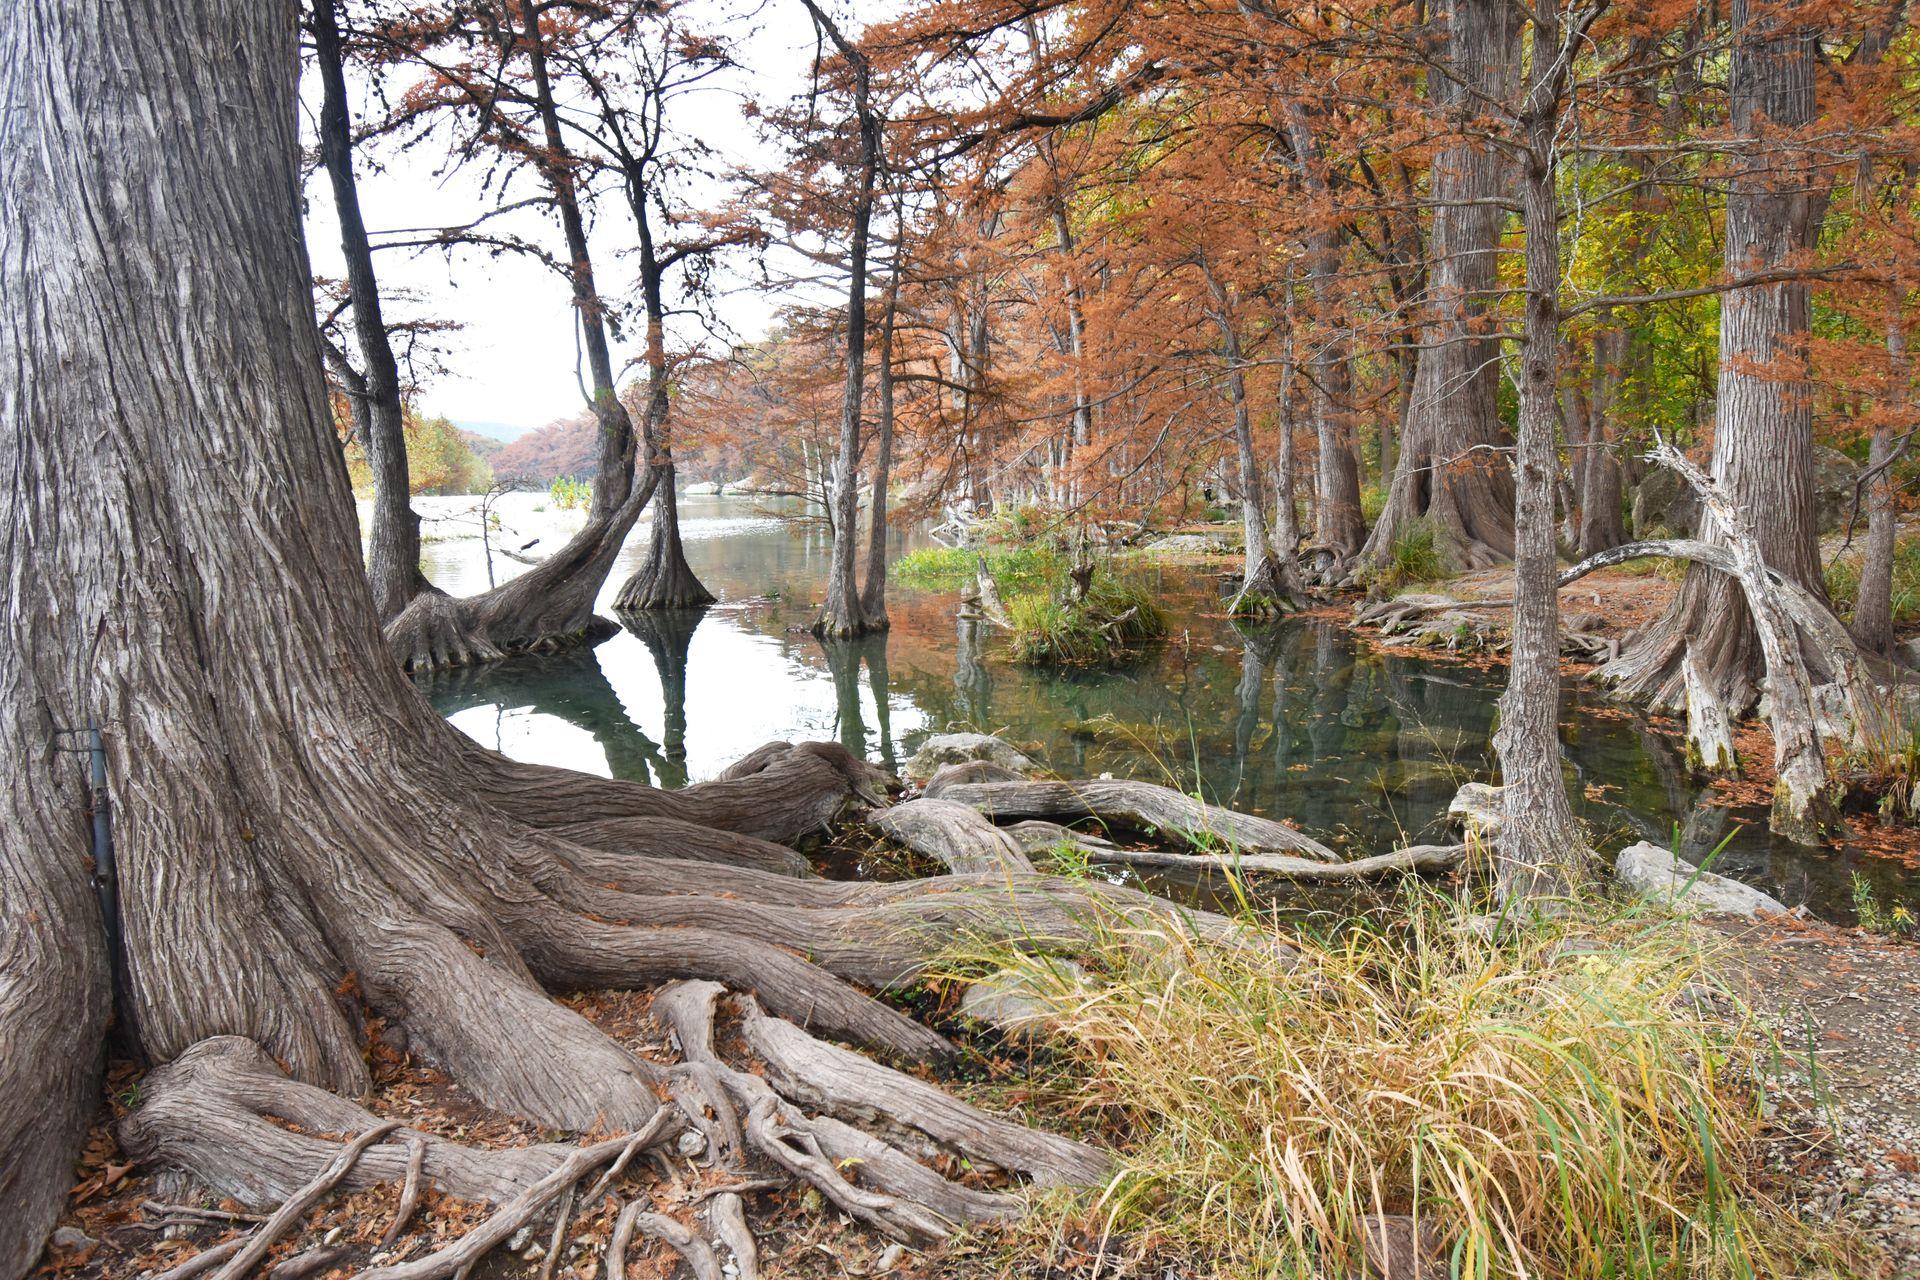 Several large trees growing out of or near the Frio Water. The trees have orange fall foliage.